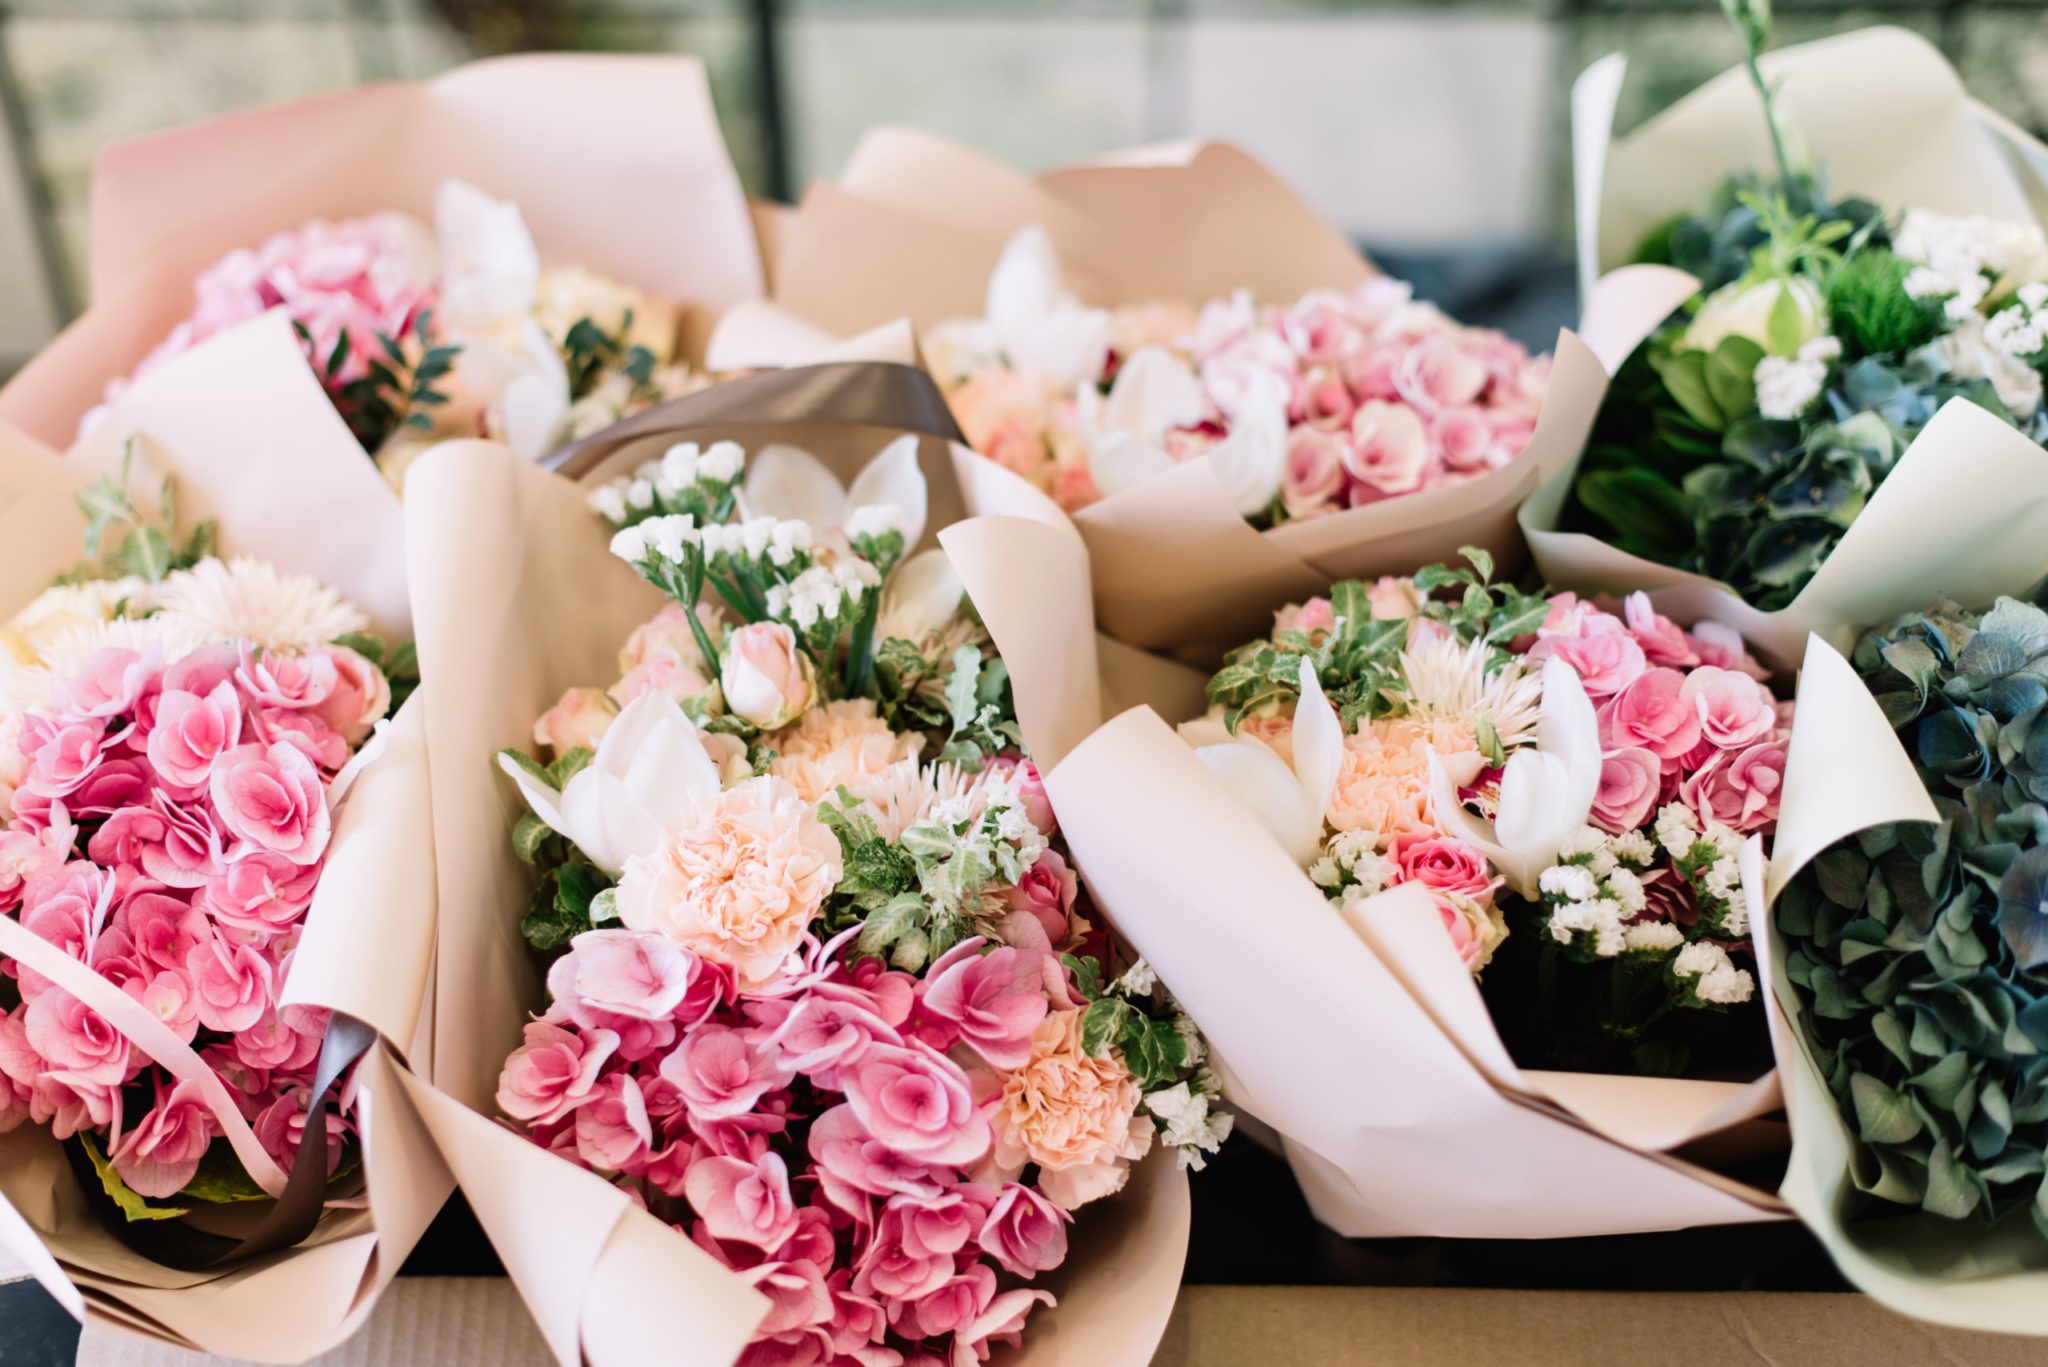 Algin Management’s Guide to the Best Florists for Valentine’s Day